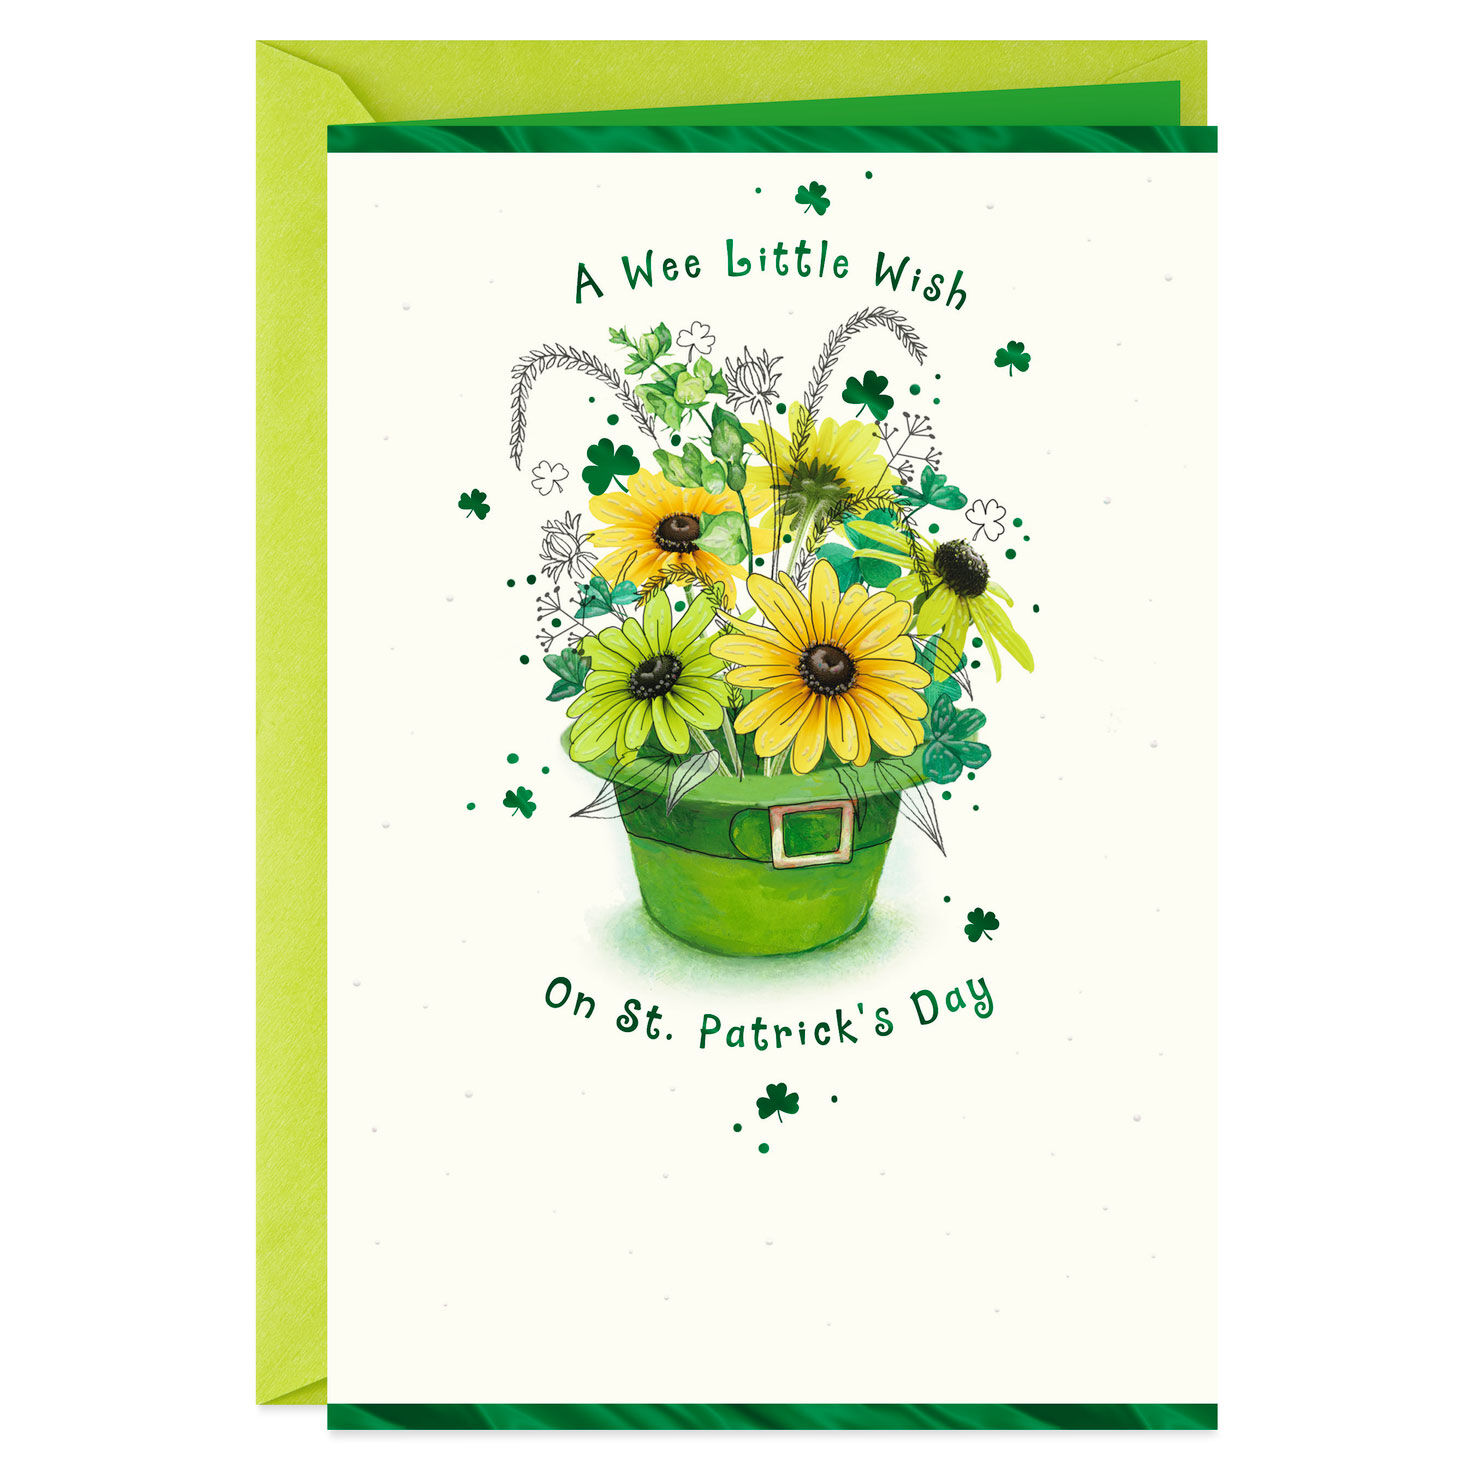 Patrick's Day Greeting Card Unused Tulips Details about   New Thinking of you on St 